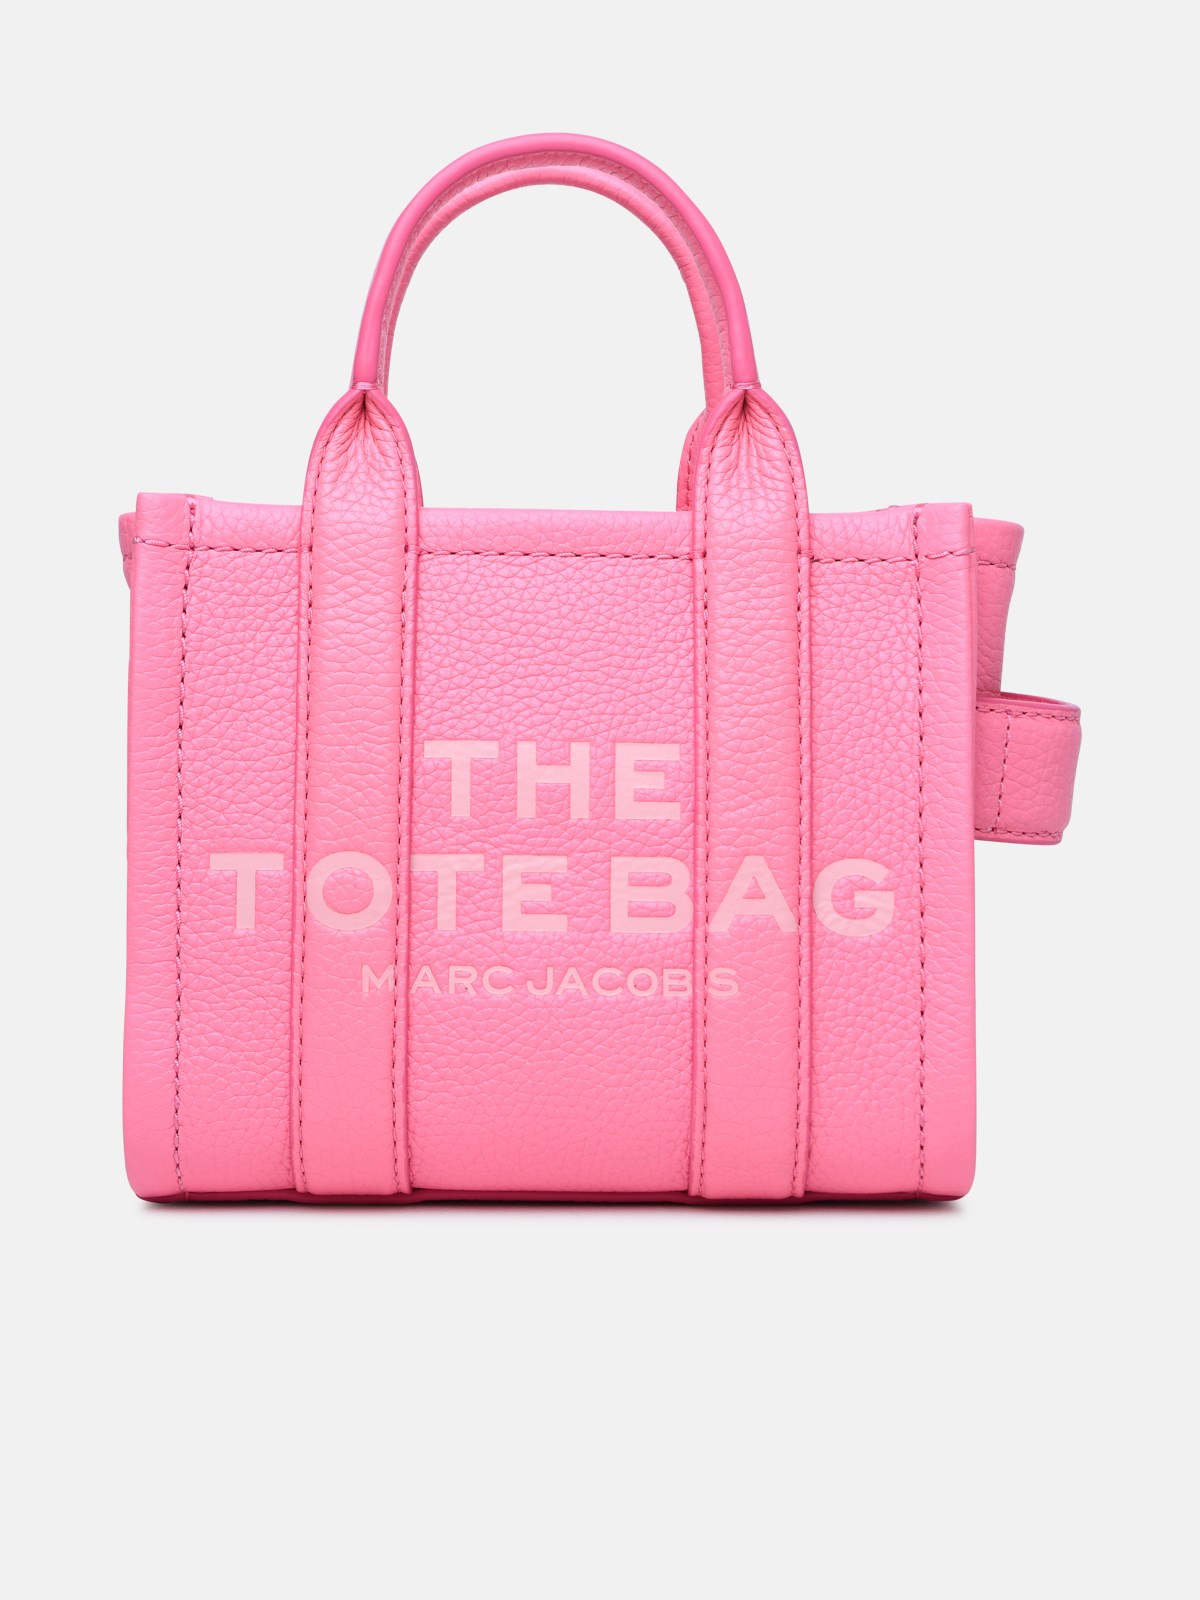 MARC JACOBS 'TOTE' PINK LEATHER MINI BAG